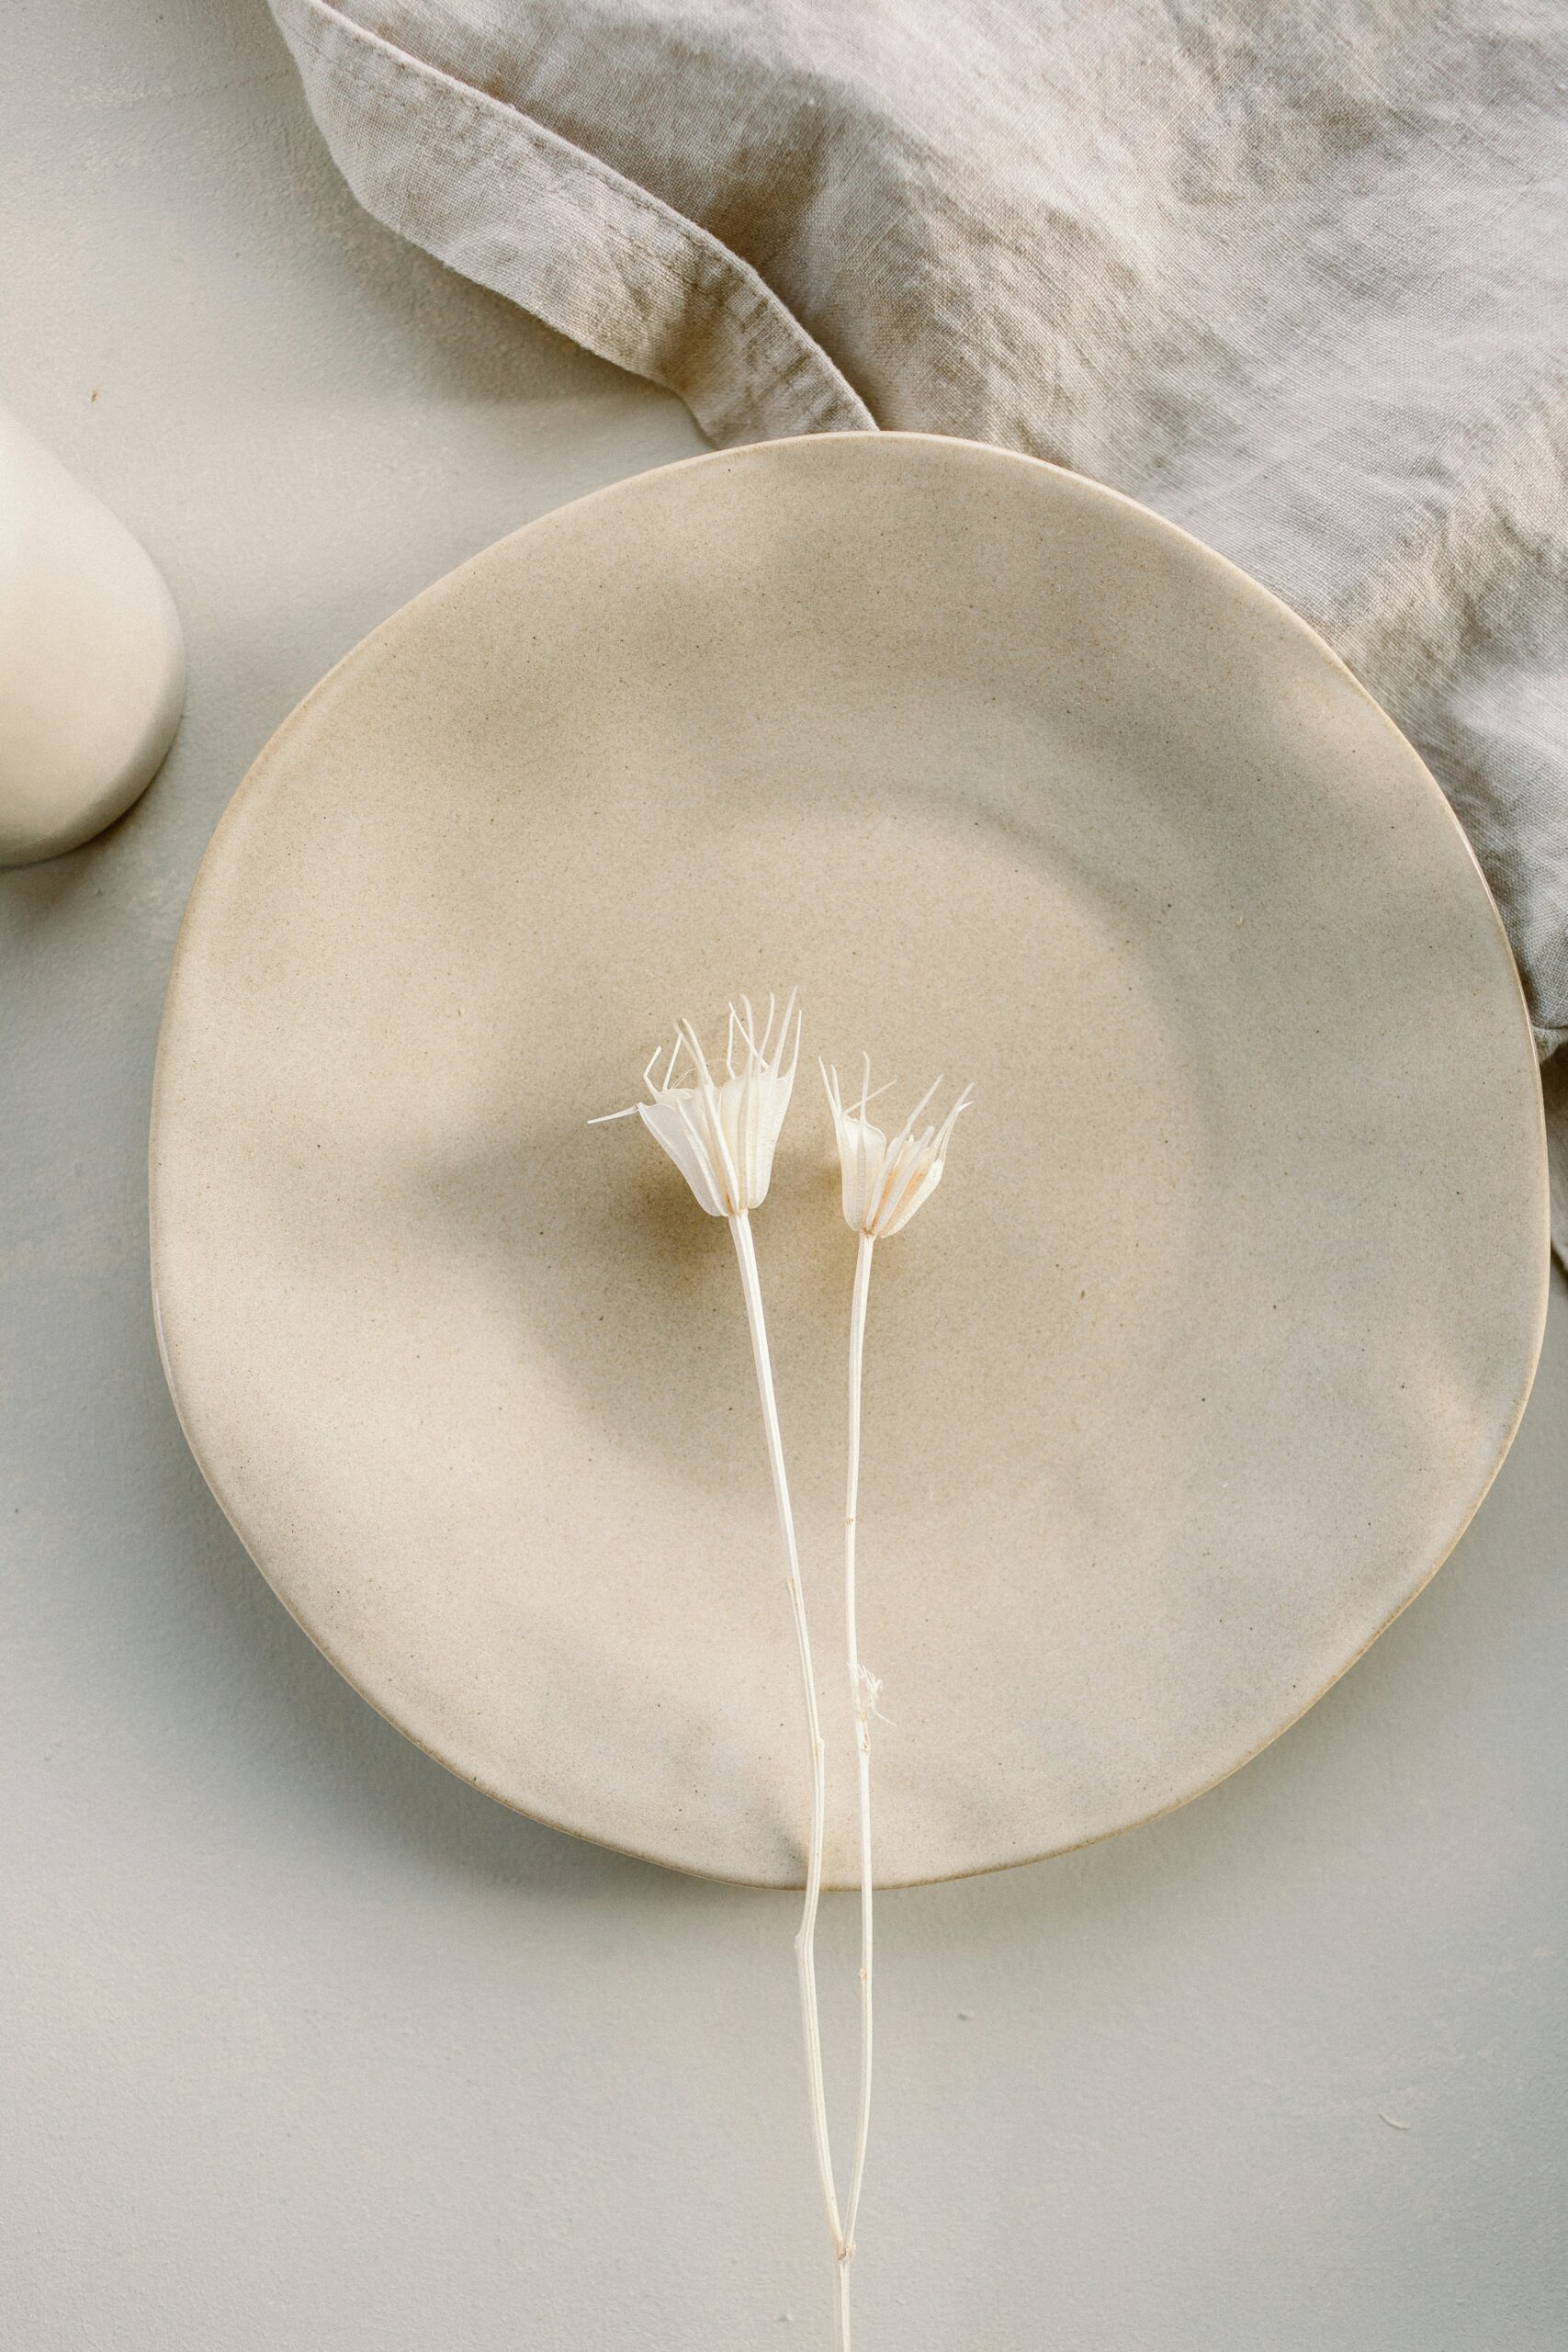 Create personalized pottery at a charming Mount Shasta studio